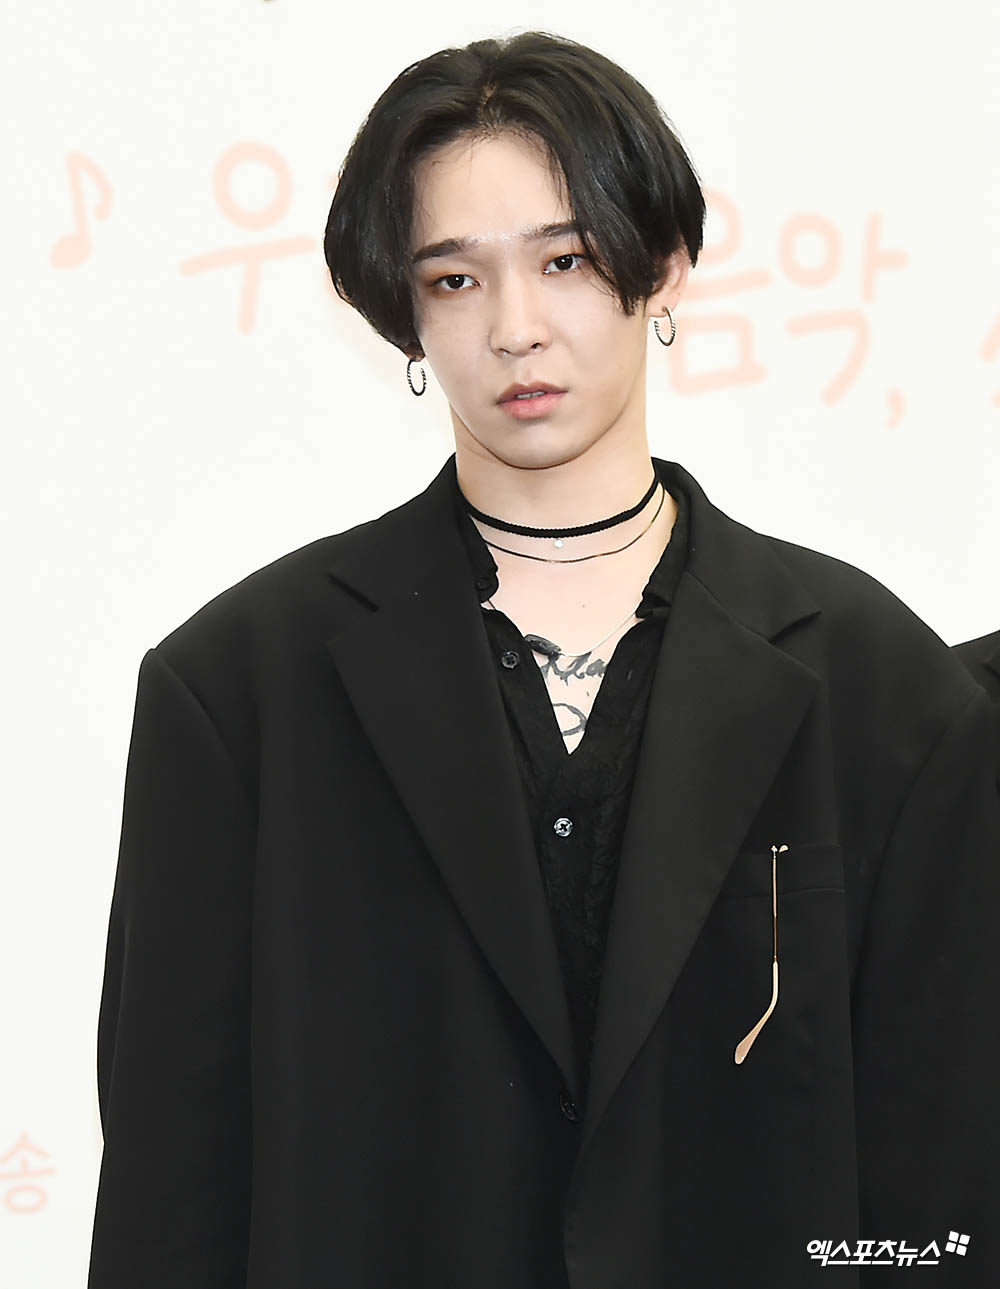 Singer Nam Tae-hyun, who attended the TVN entertainment program Working Room production presentation held at Stanford Hotel in Sangam-dong, Seoul on the afternoon of the 29th, has photo time.